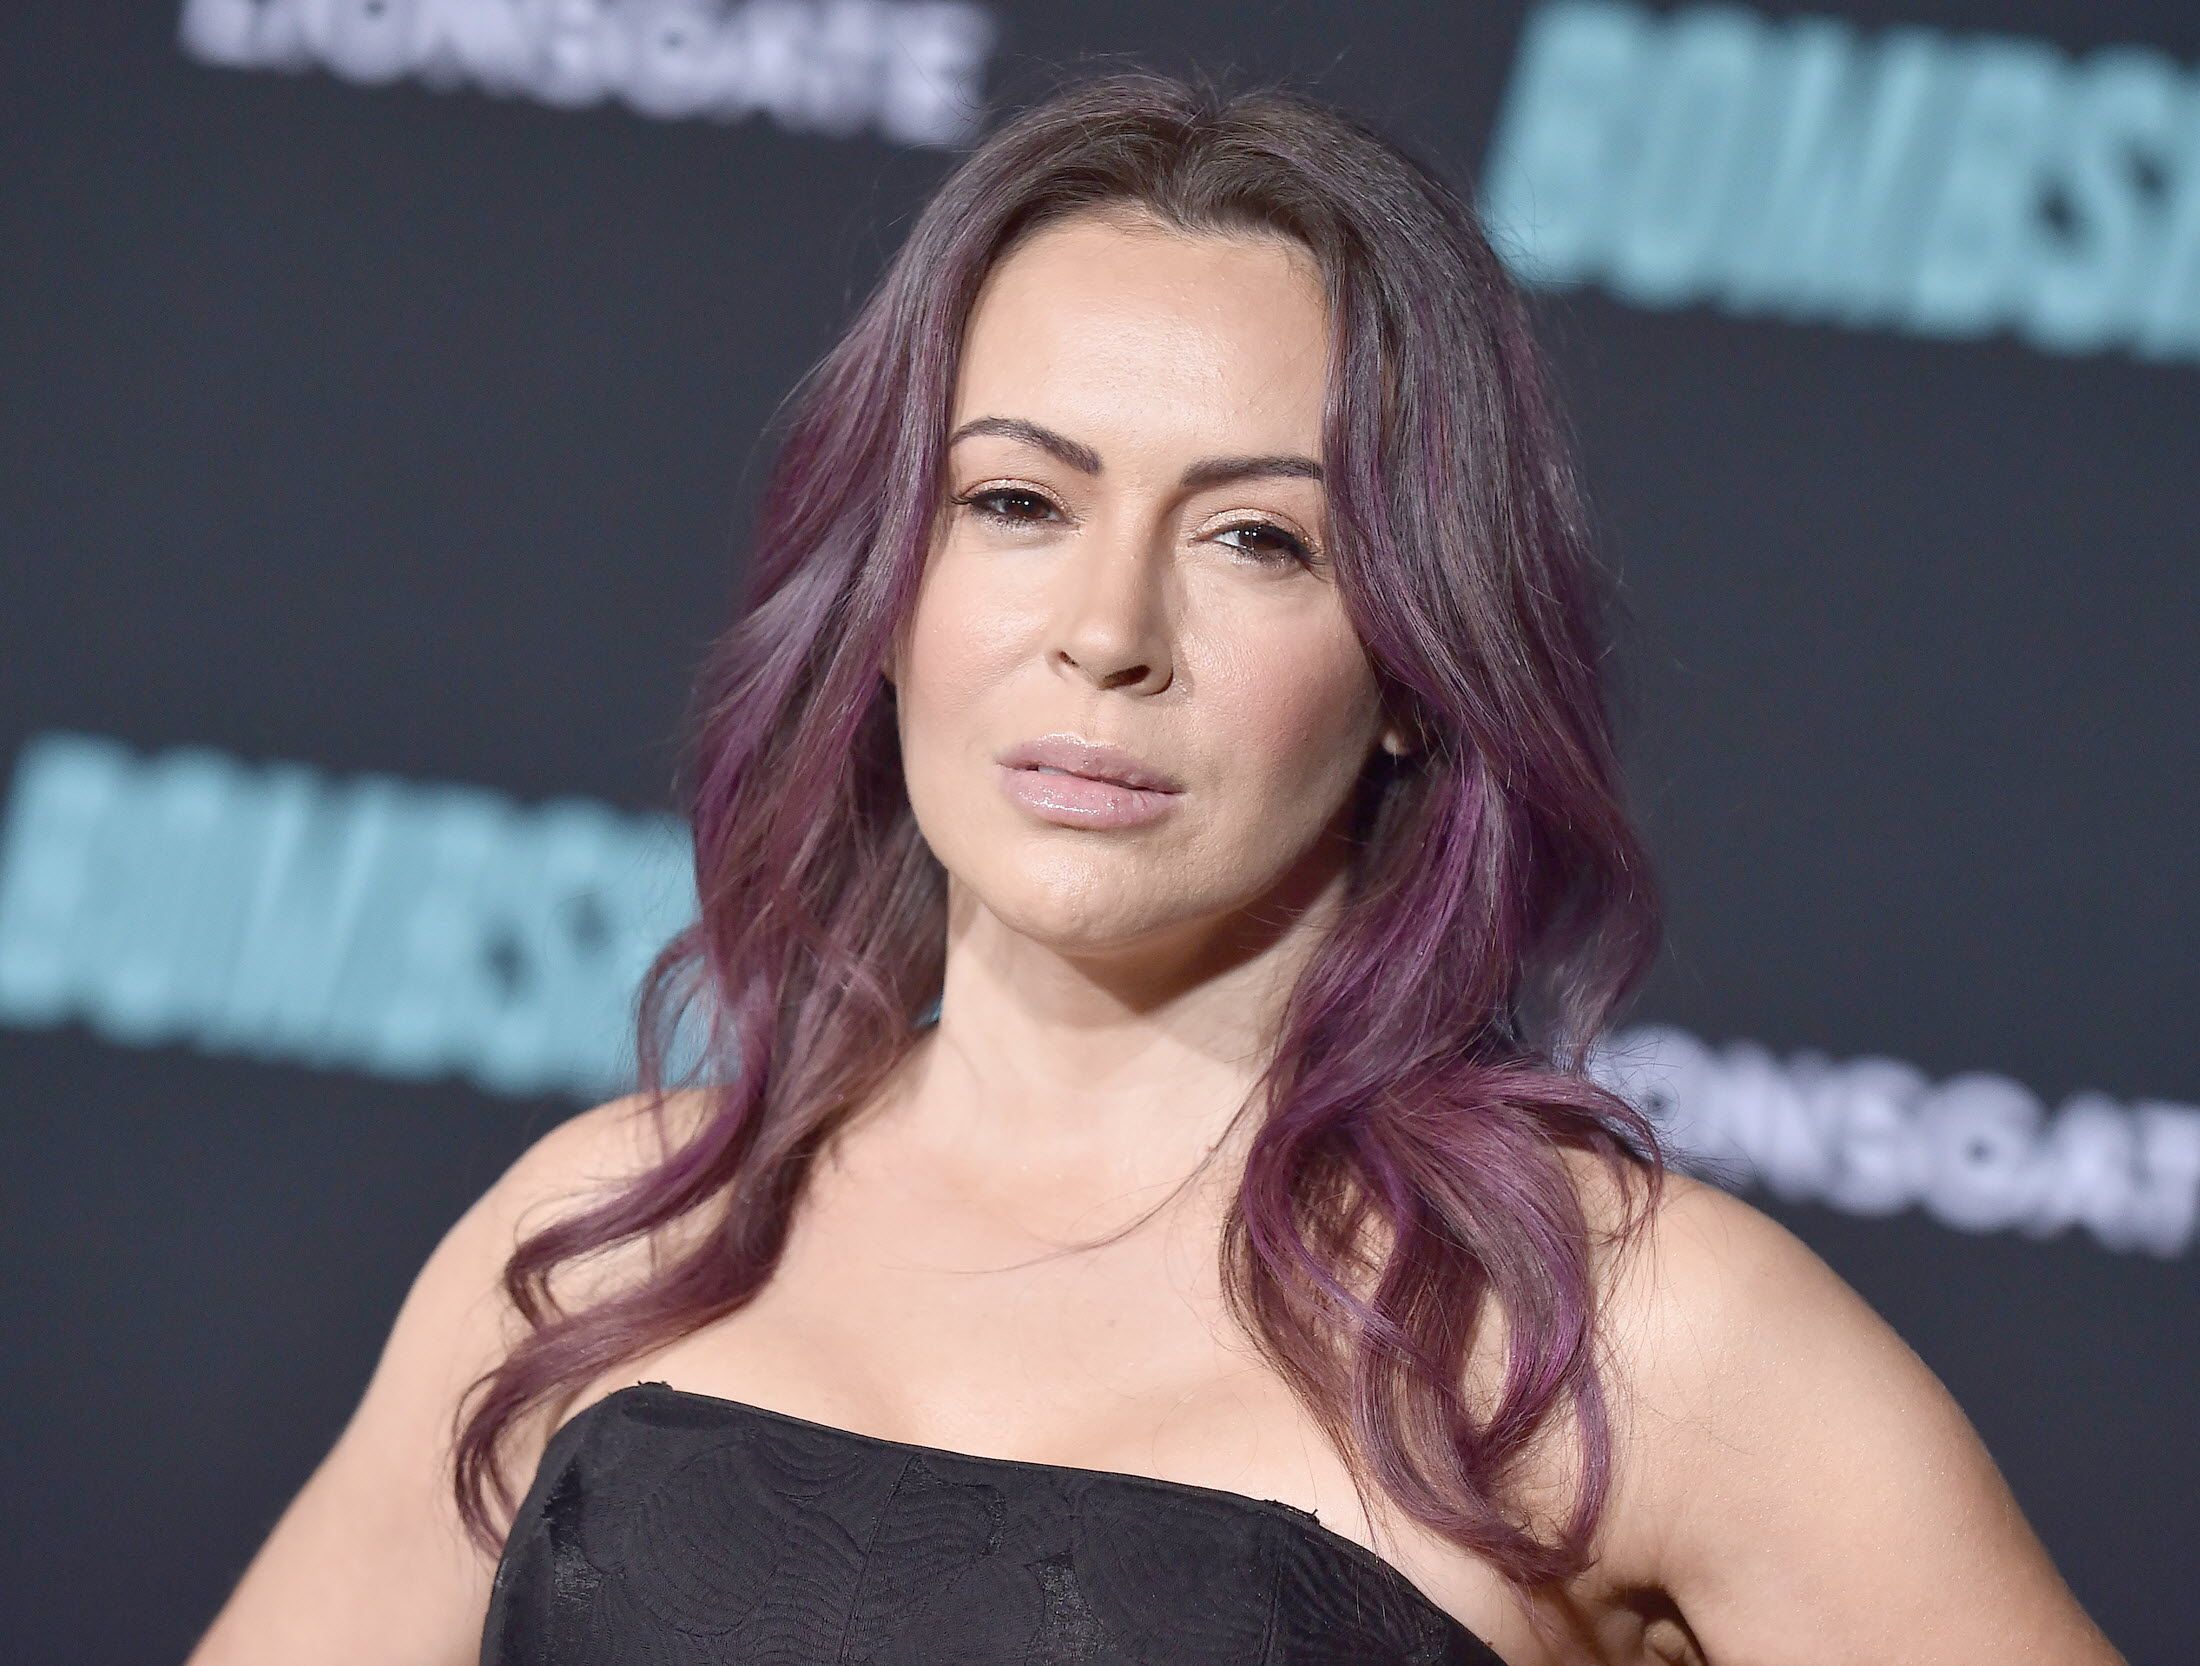 In a video shared to Twitter, Alyssa Milano shares her struggles with hair loss after suffering from symptoms of COVID-19. An increasing number of patients are reporting hair loss months after their diagnosis.